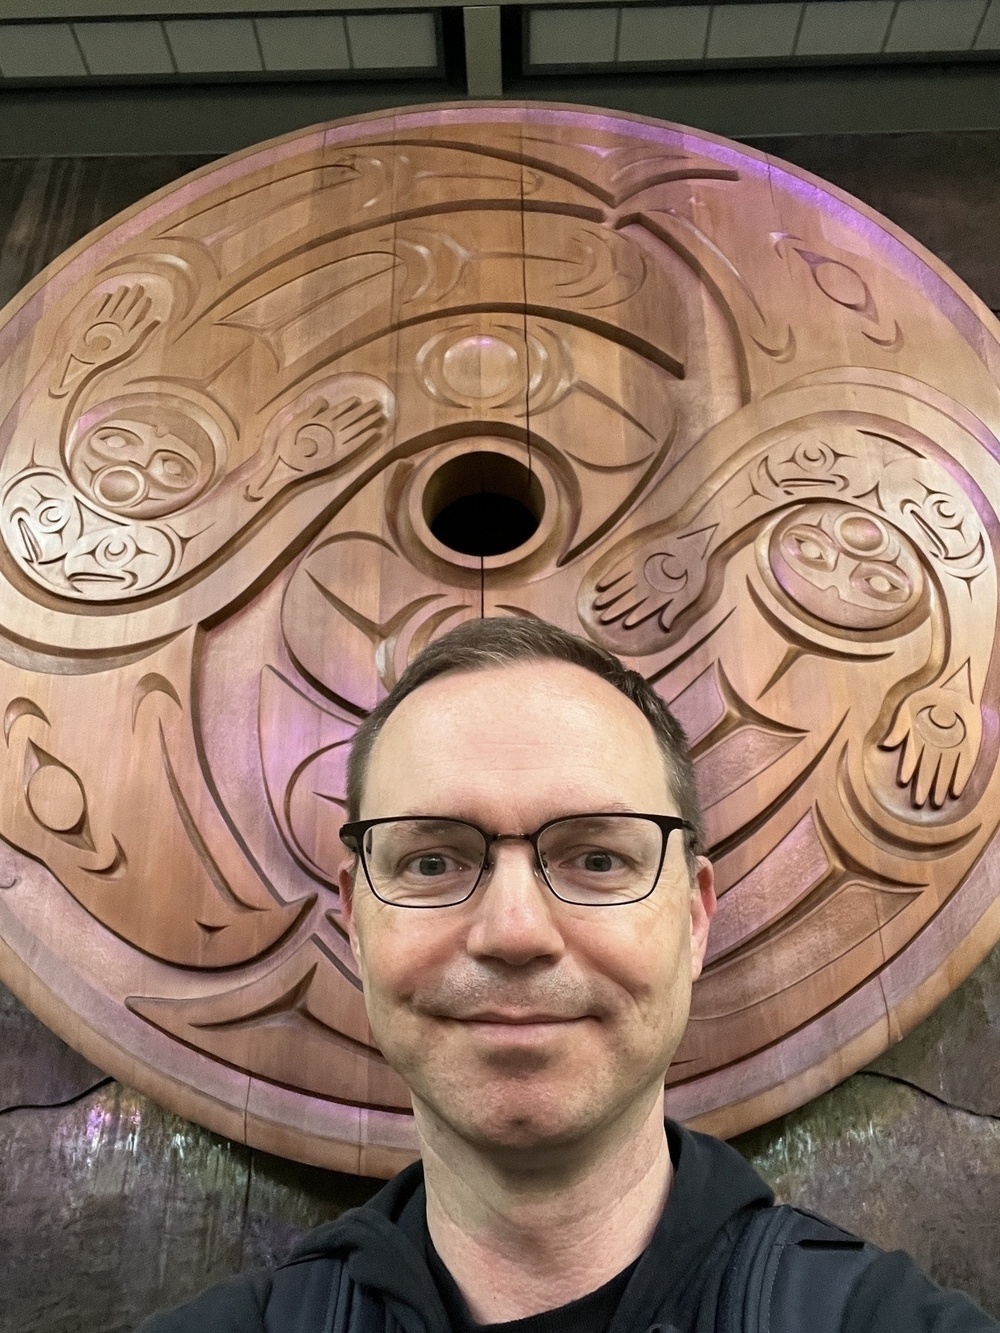 Chad selfie at the welcome carving at YVR immigration